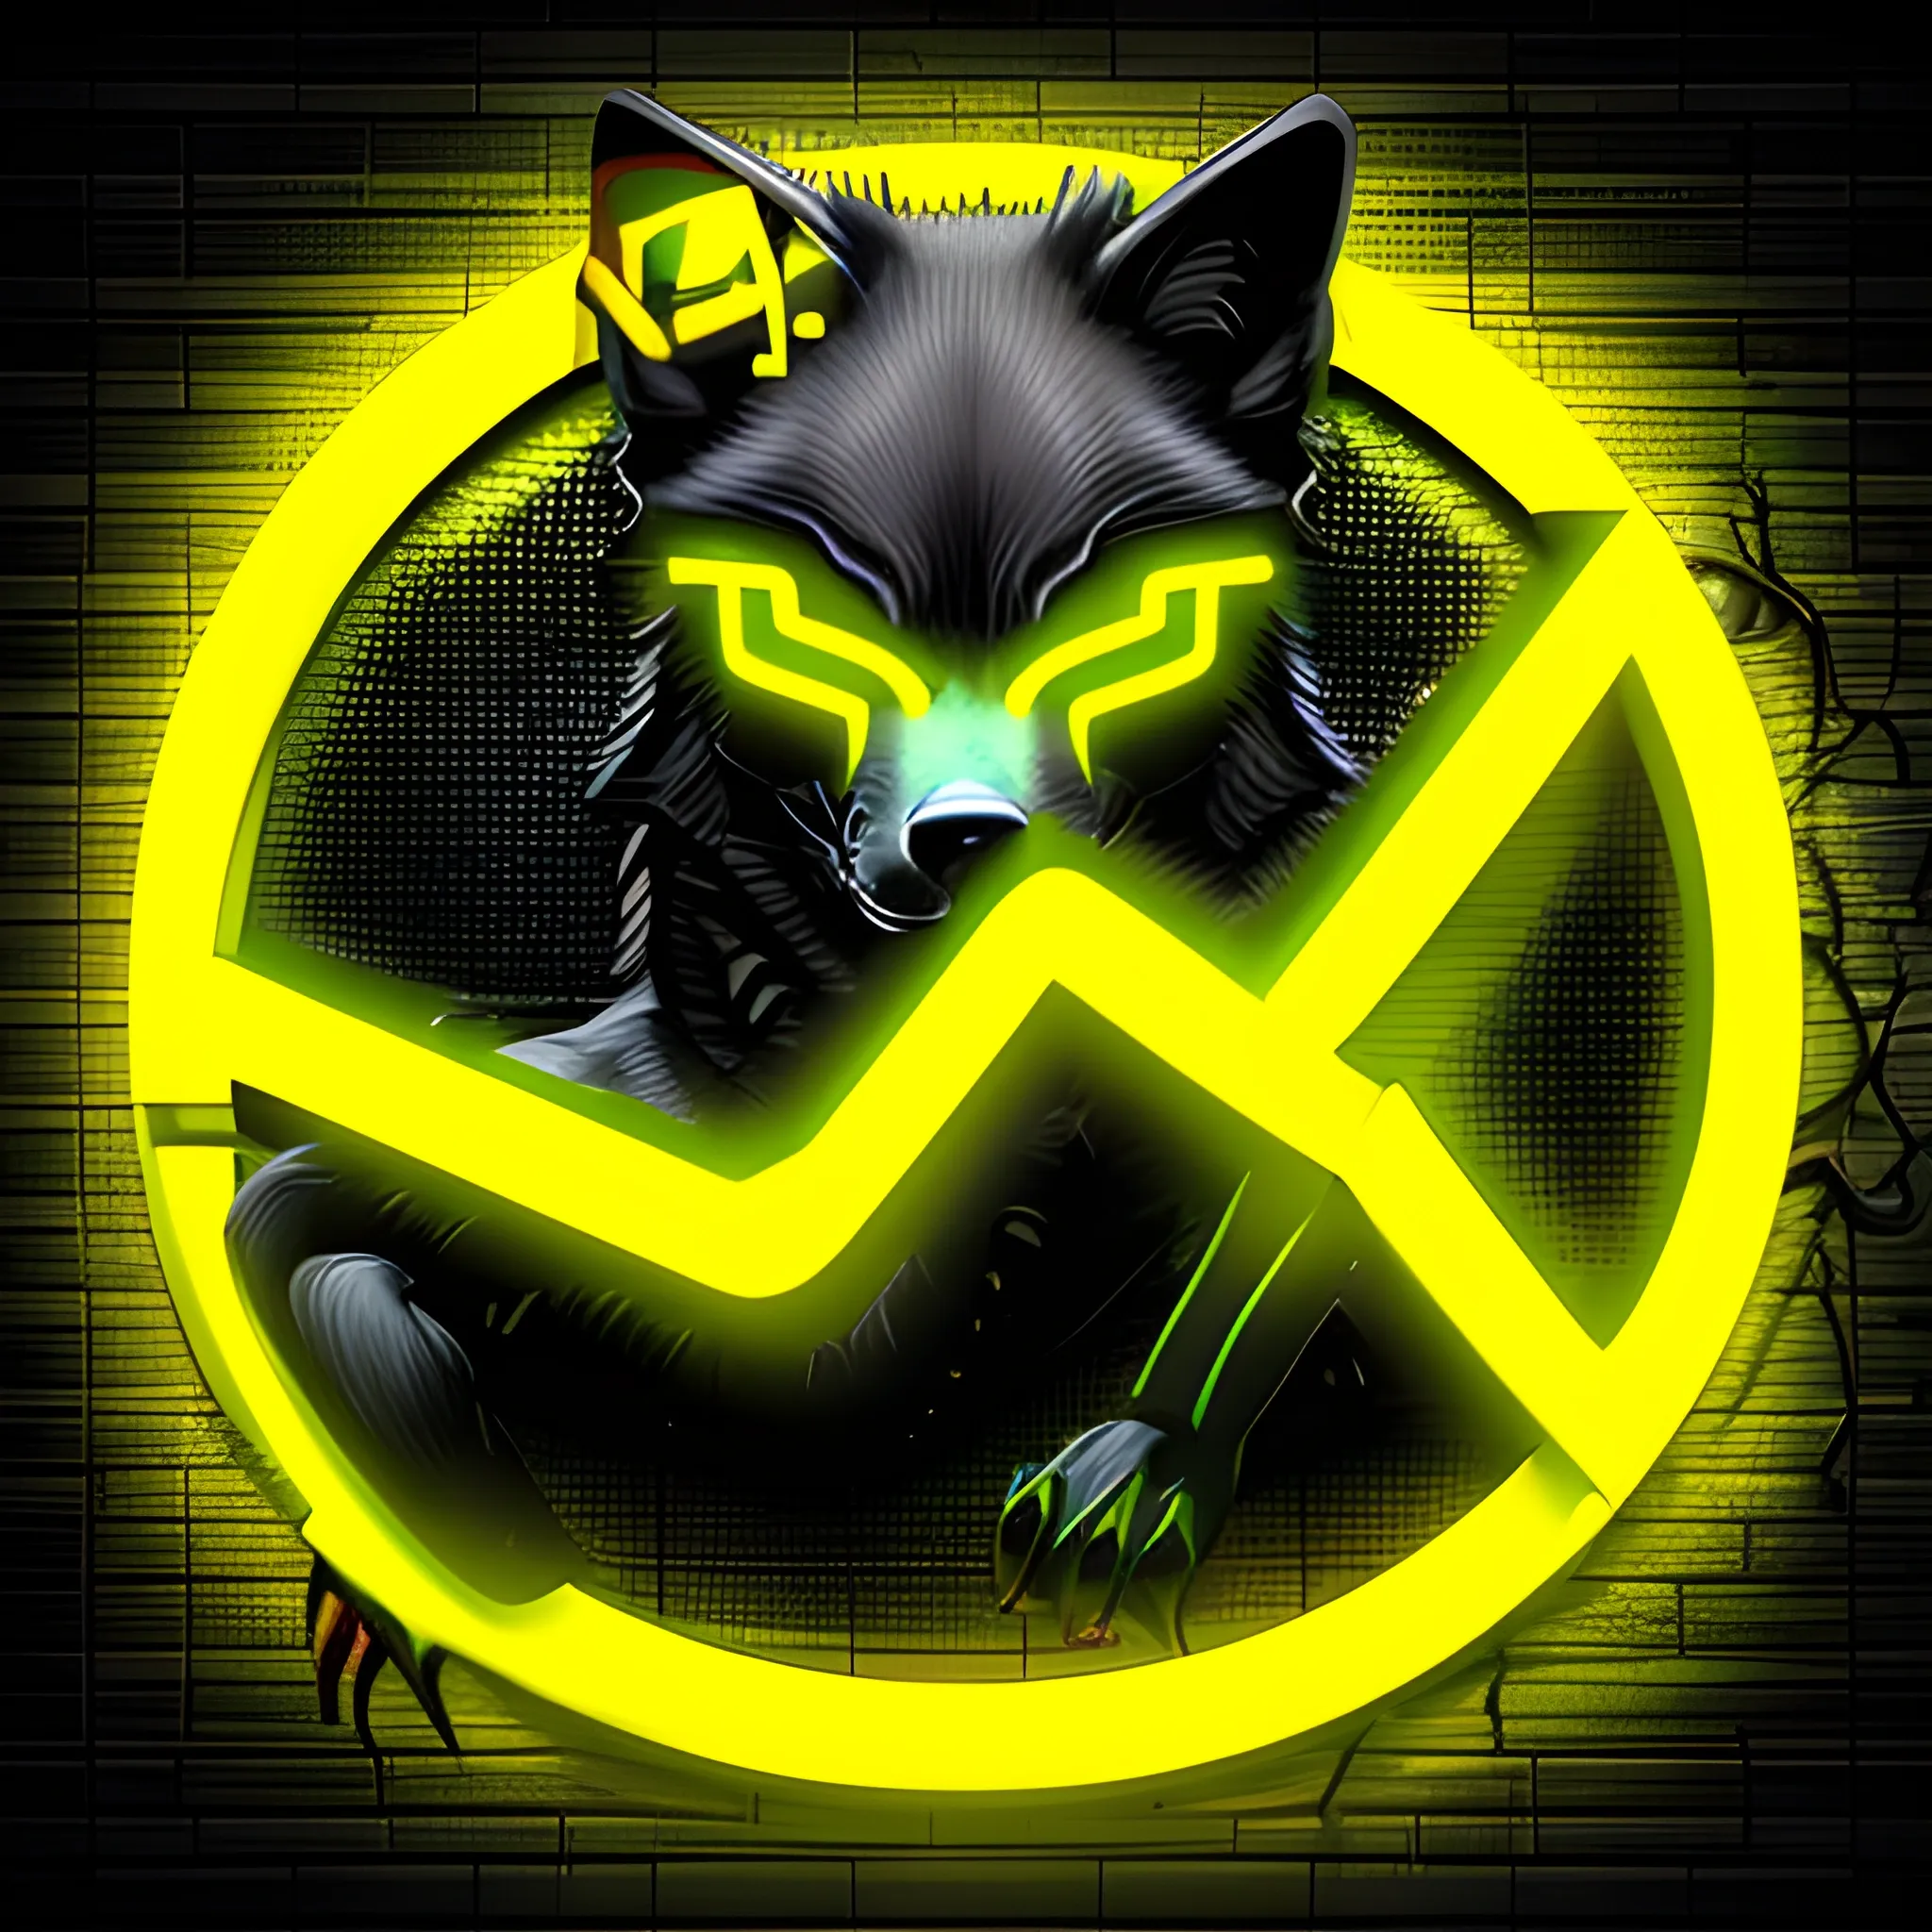 An angry Matrix wolf logo with the letter "A" at the background, using the yellow neon color, 3D